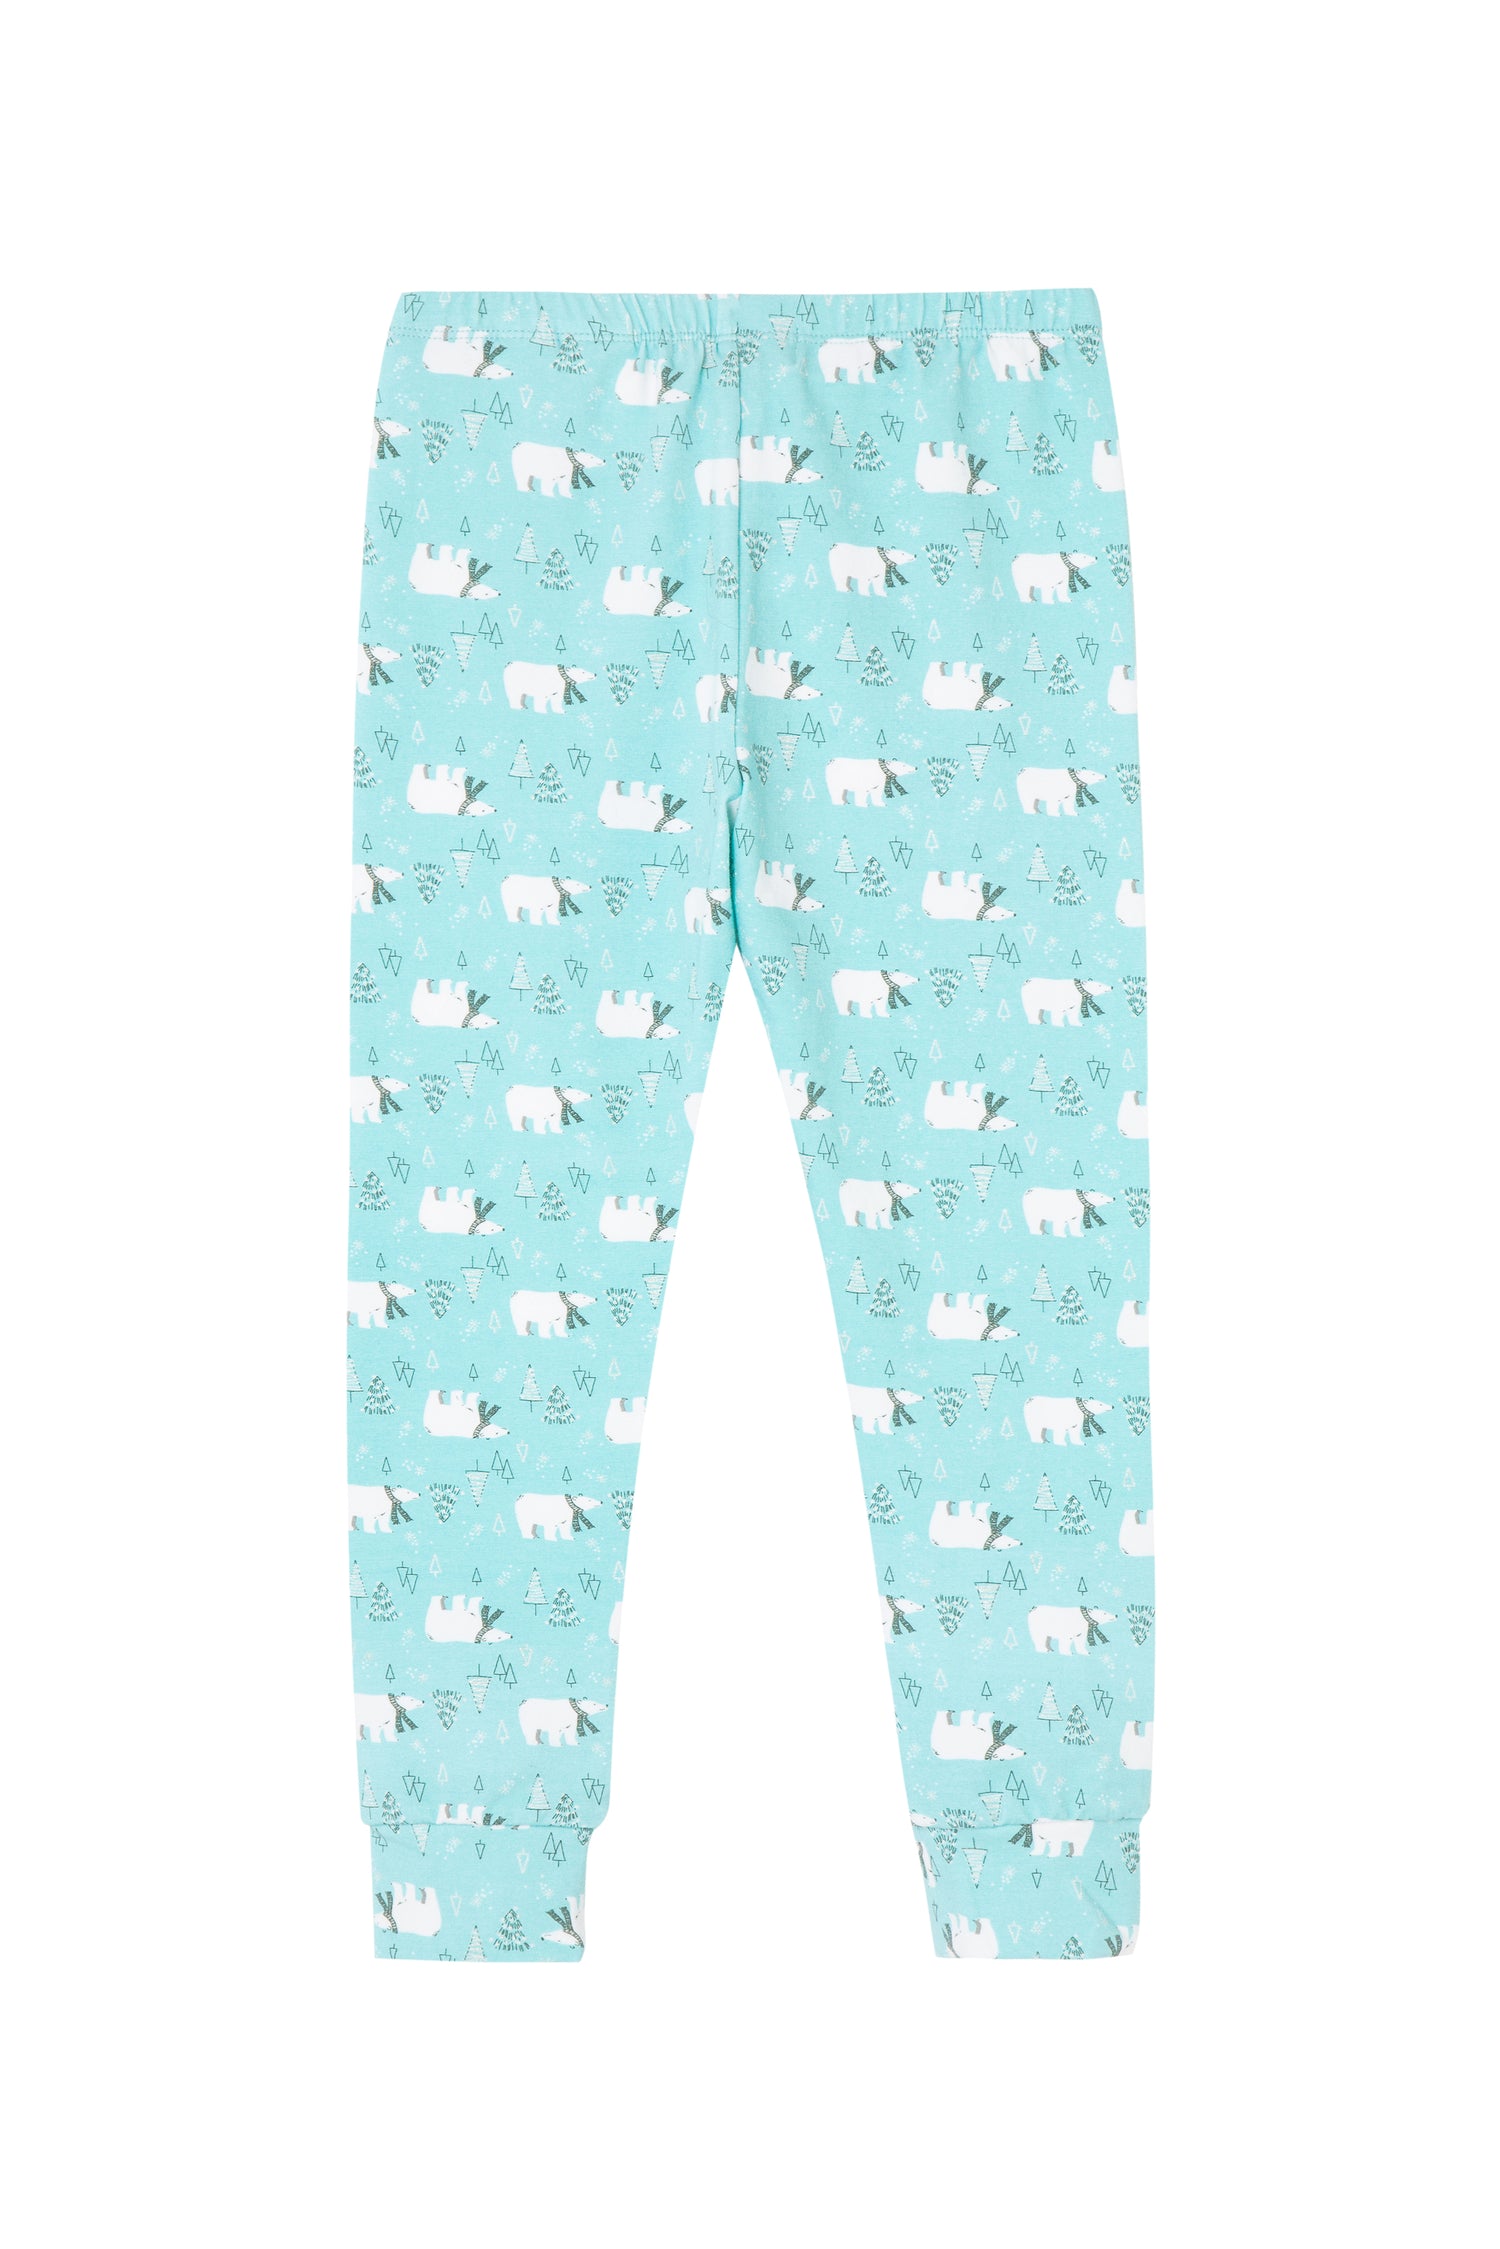 Back view of blue leggings with polar bears